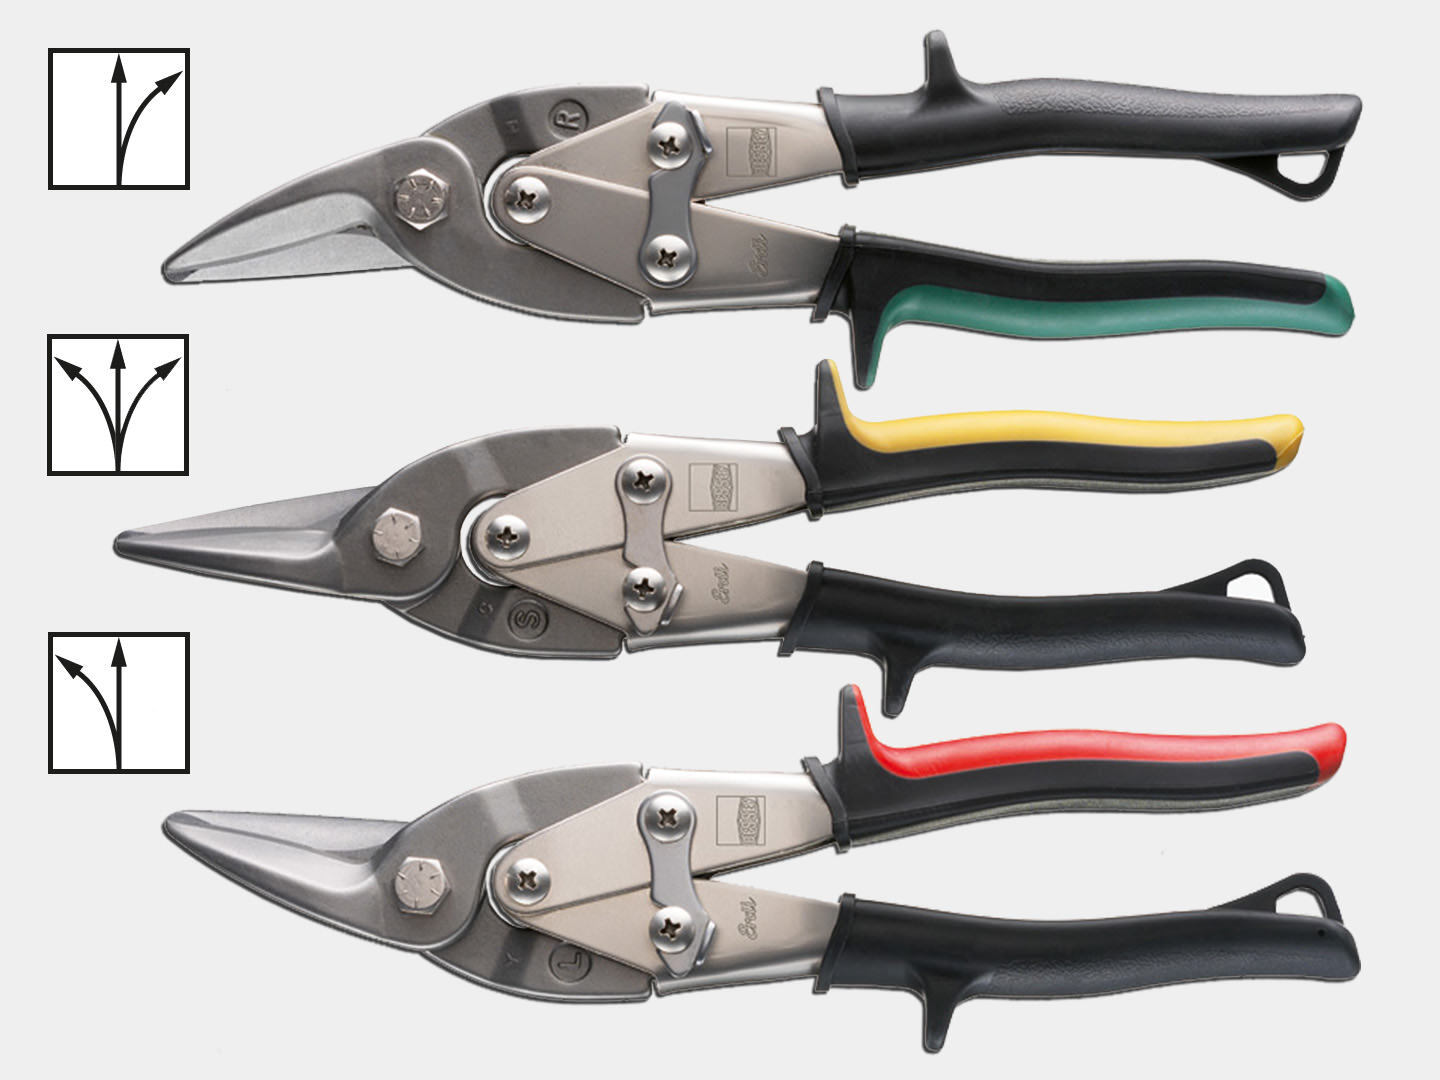 Bessey Erdi Punch Snips - Curved Blades for Round Cuts